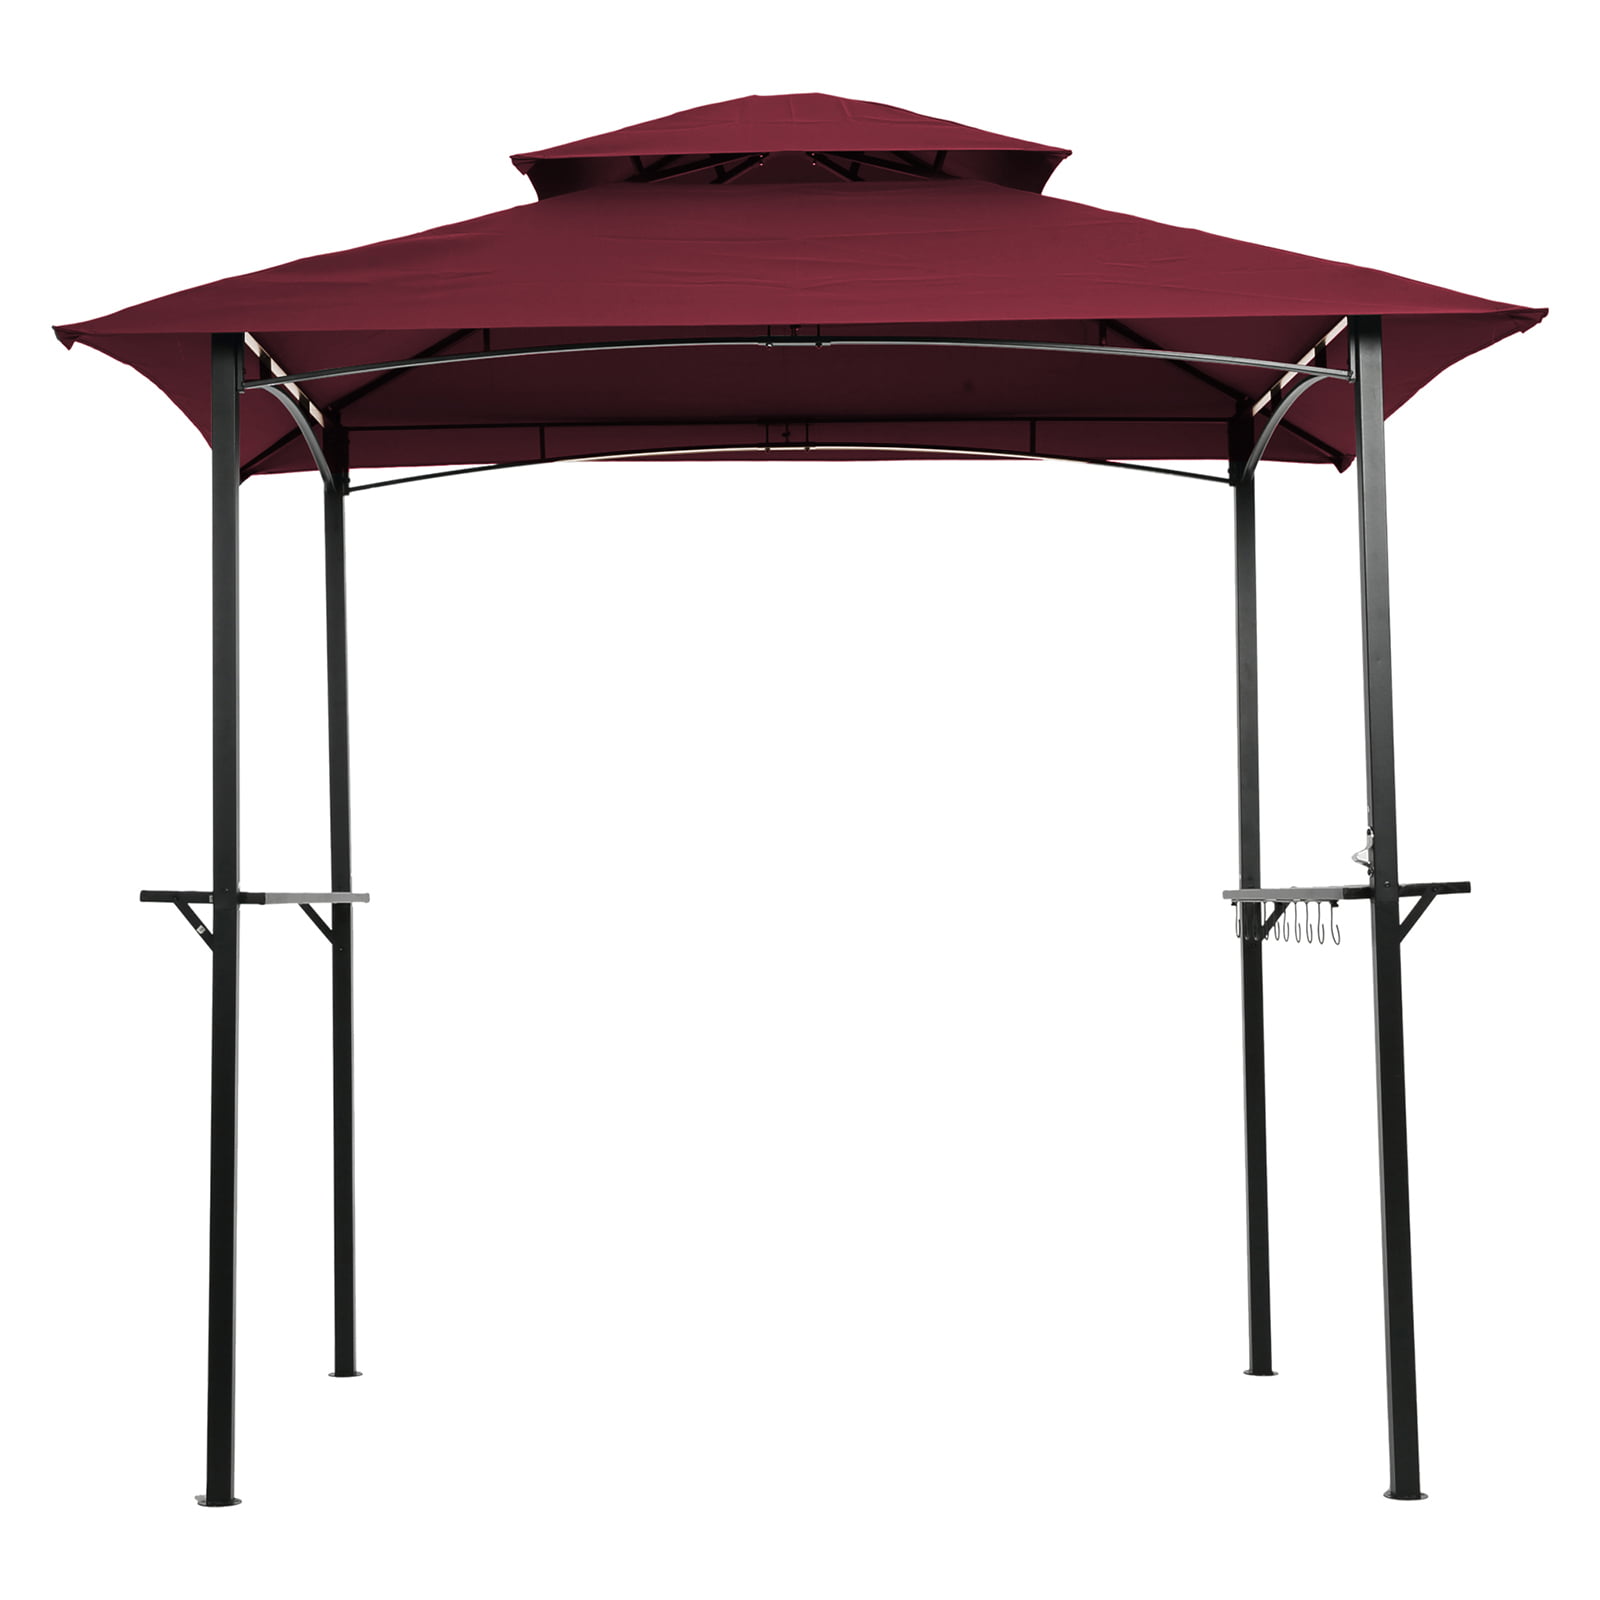 Clearance Sales 8 x 5 Ft Summer Awning, Outdoor Grill Gazebo Double ...